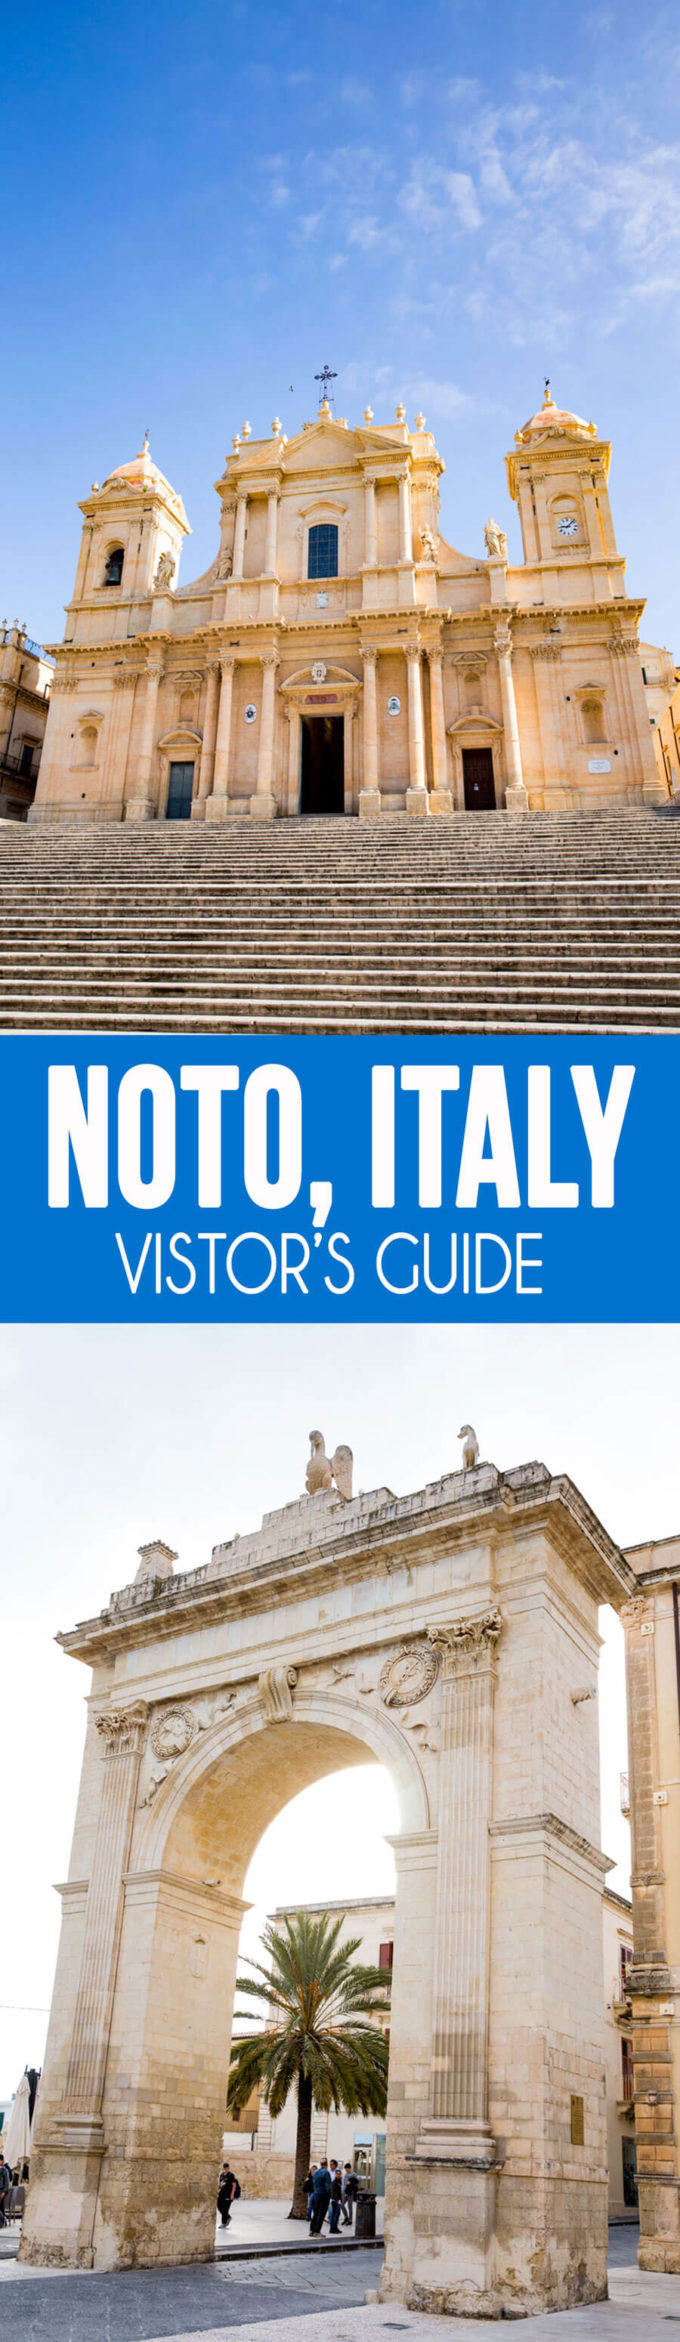 A guide to visiting Noto, Sicily Italy